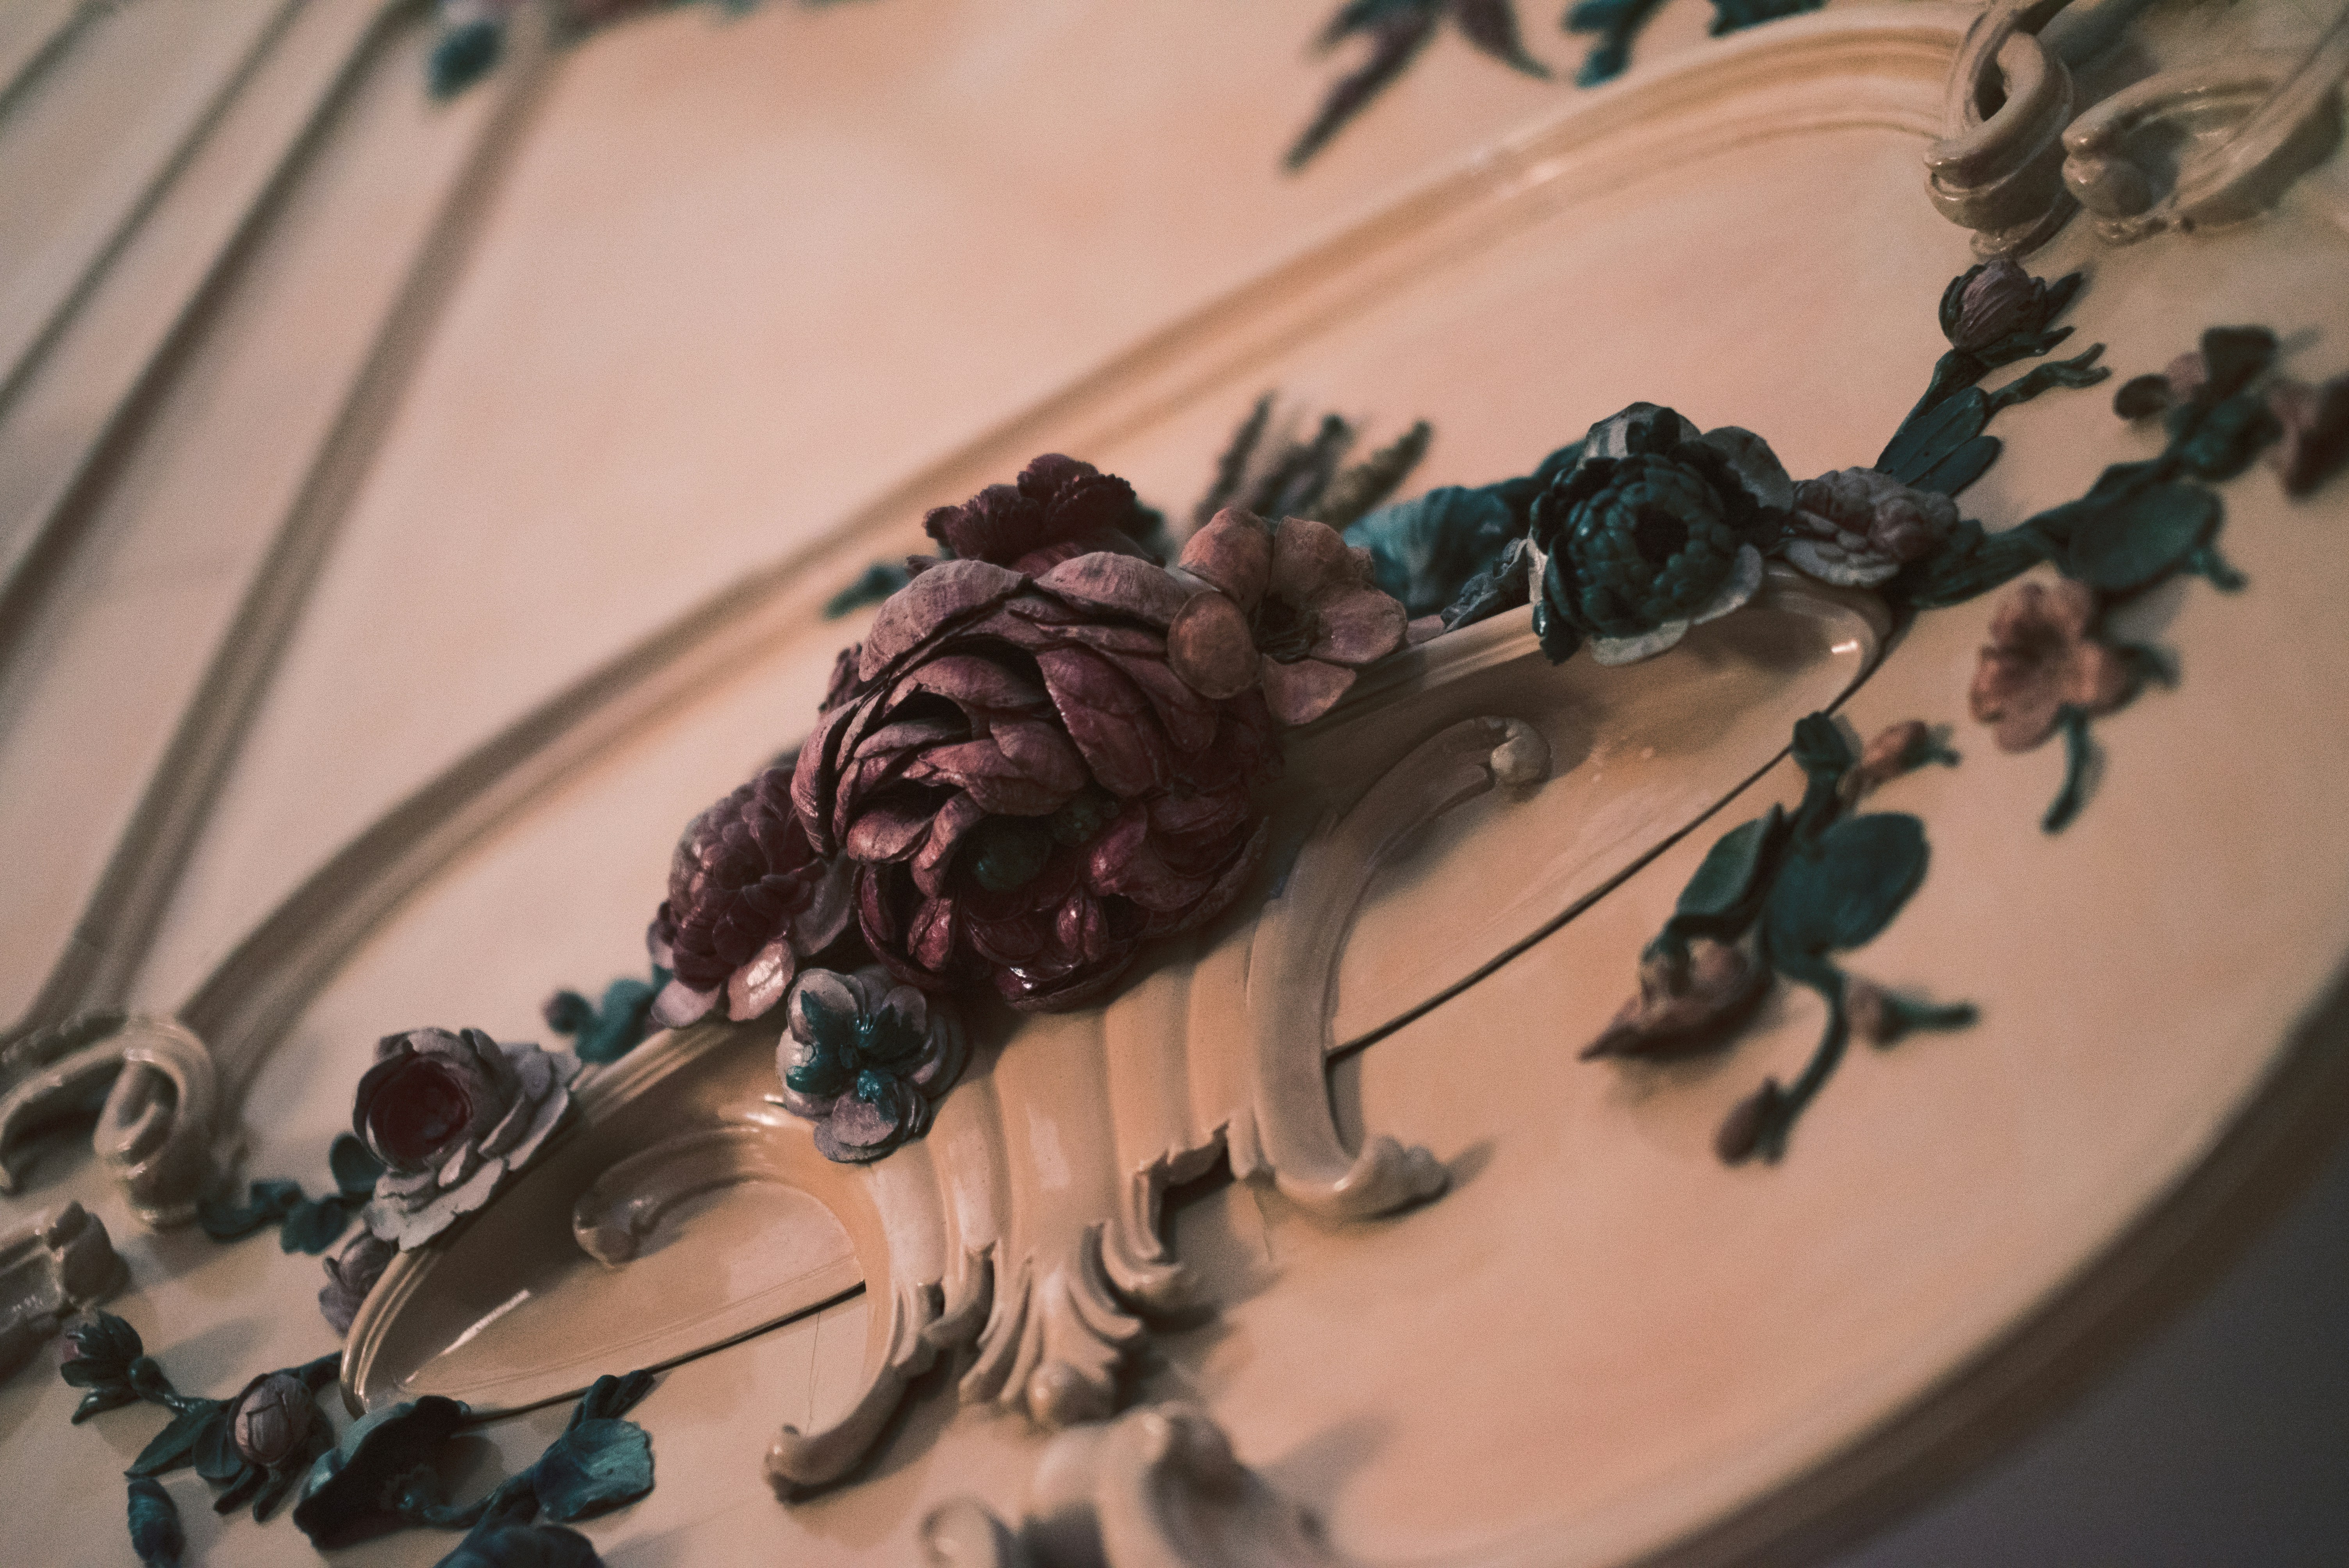 Floral ornament at a rococo palace in Germany<br />
December 2021